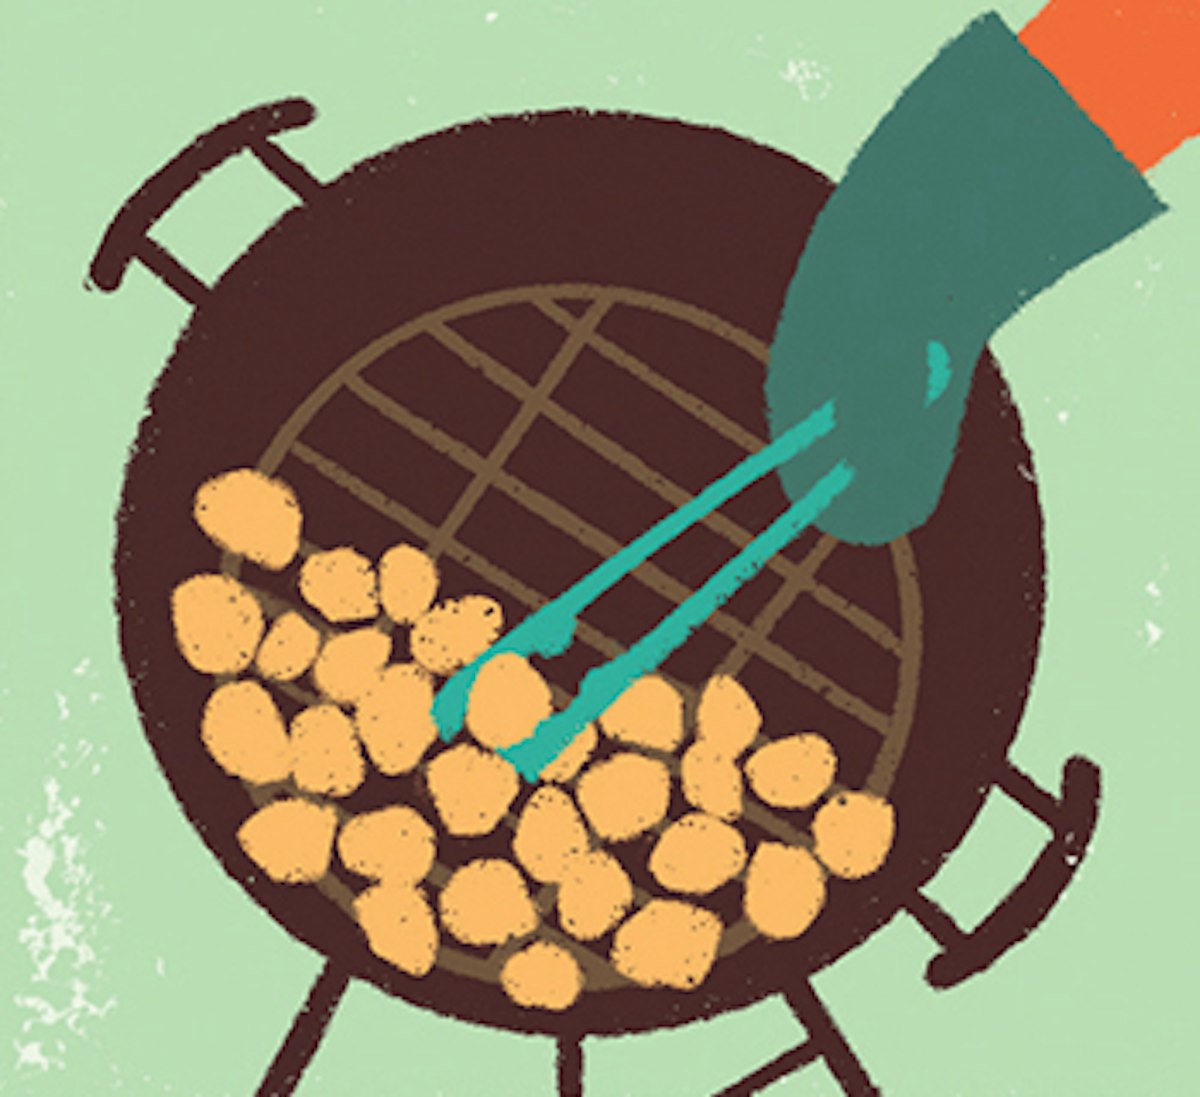 An illustration of a person grilling potatoes on a grill.